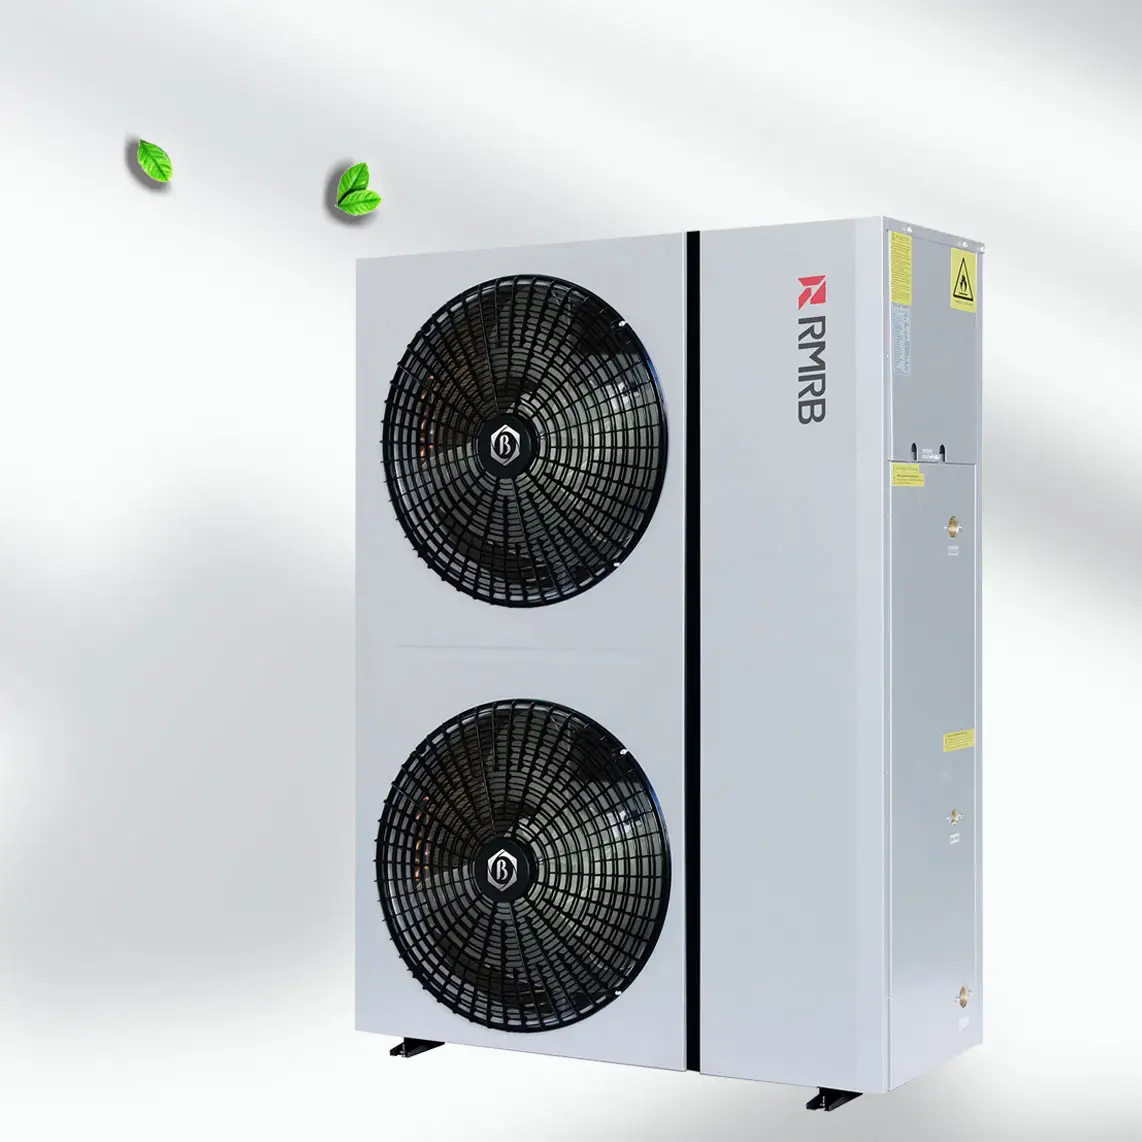 OEM Customized DC Inverter heat pump Water Heater 20KW 22KW Energy Saving R32 heat pump for house heating and cooling